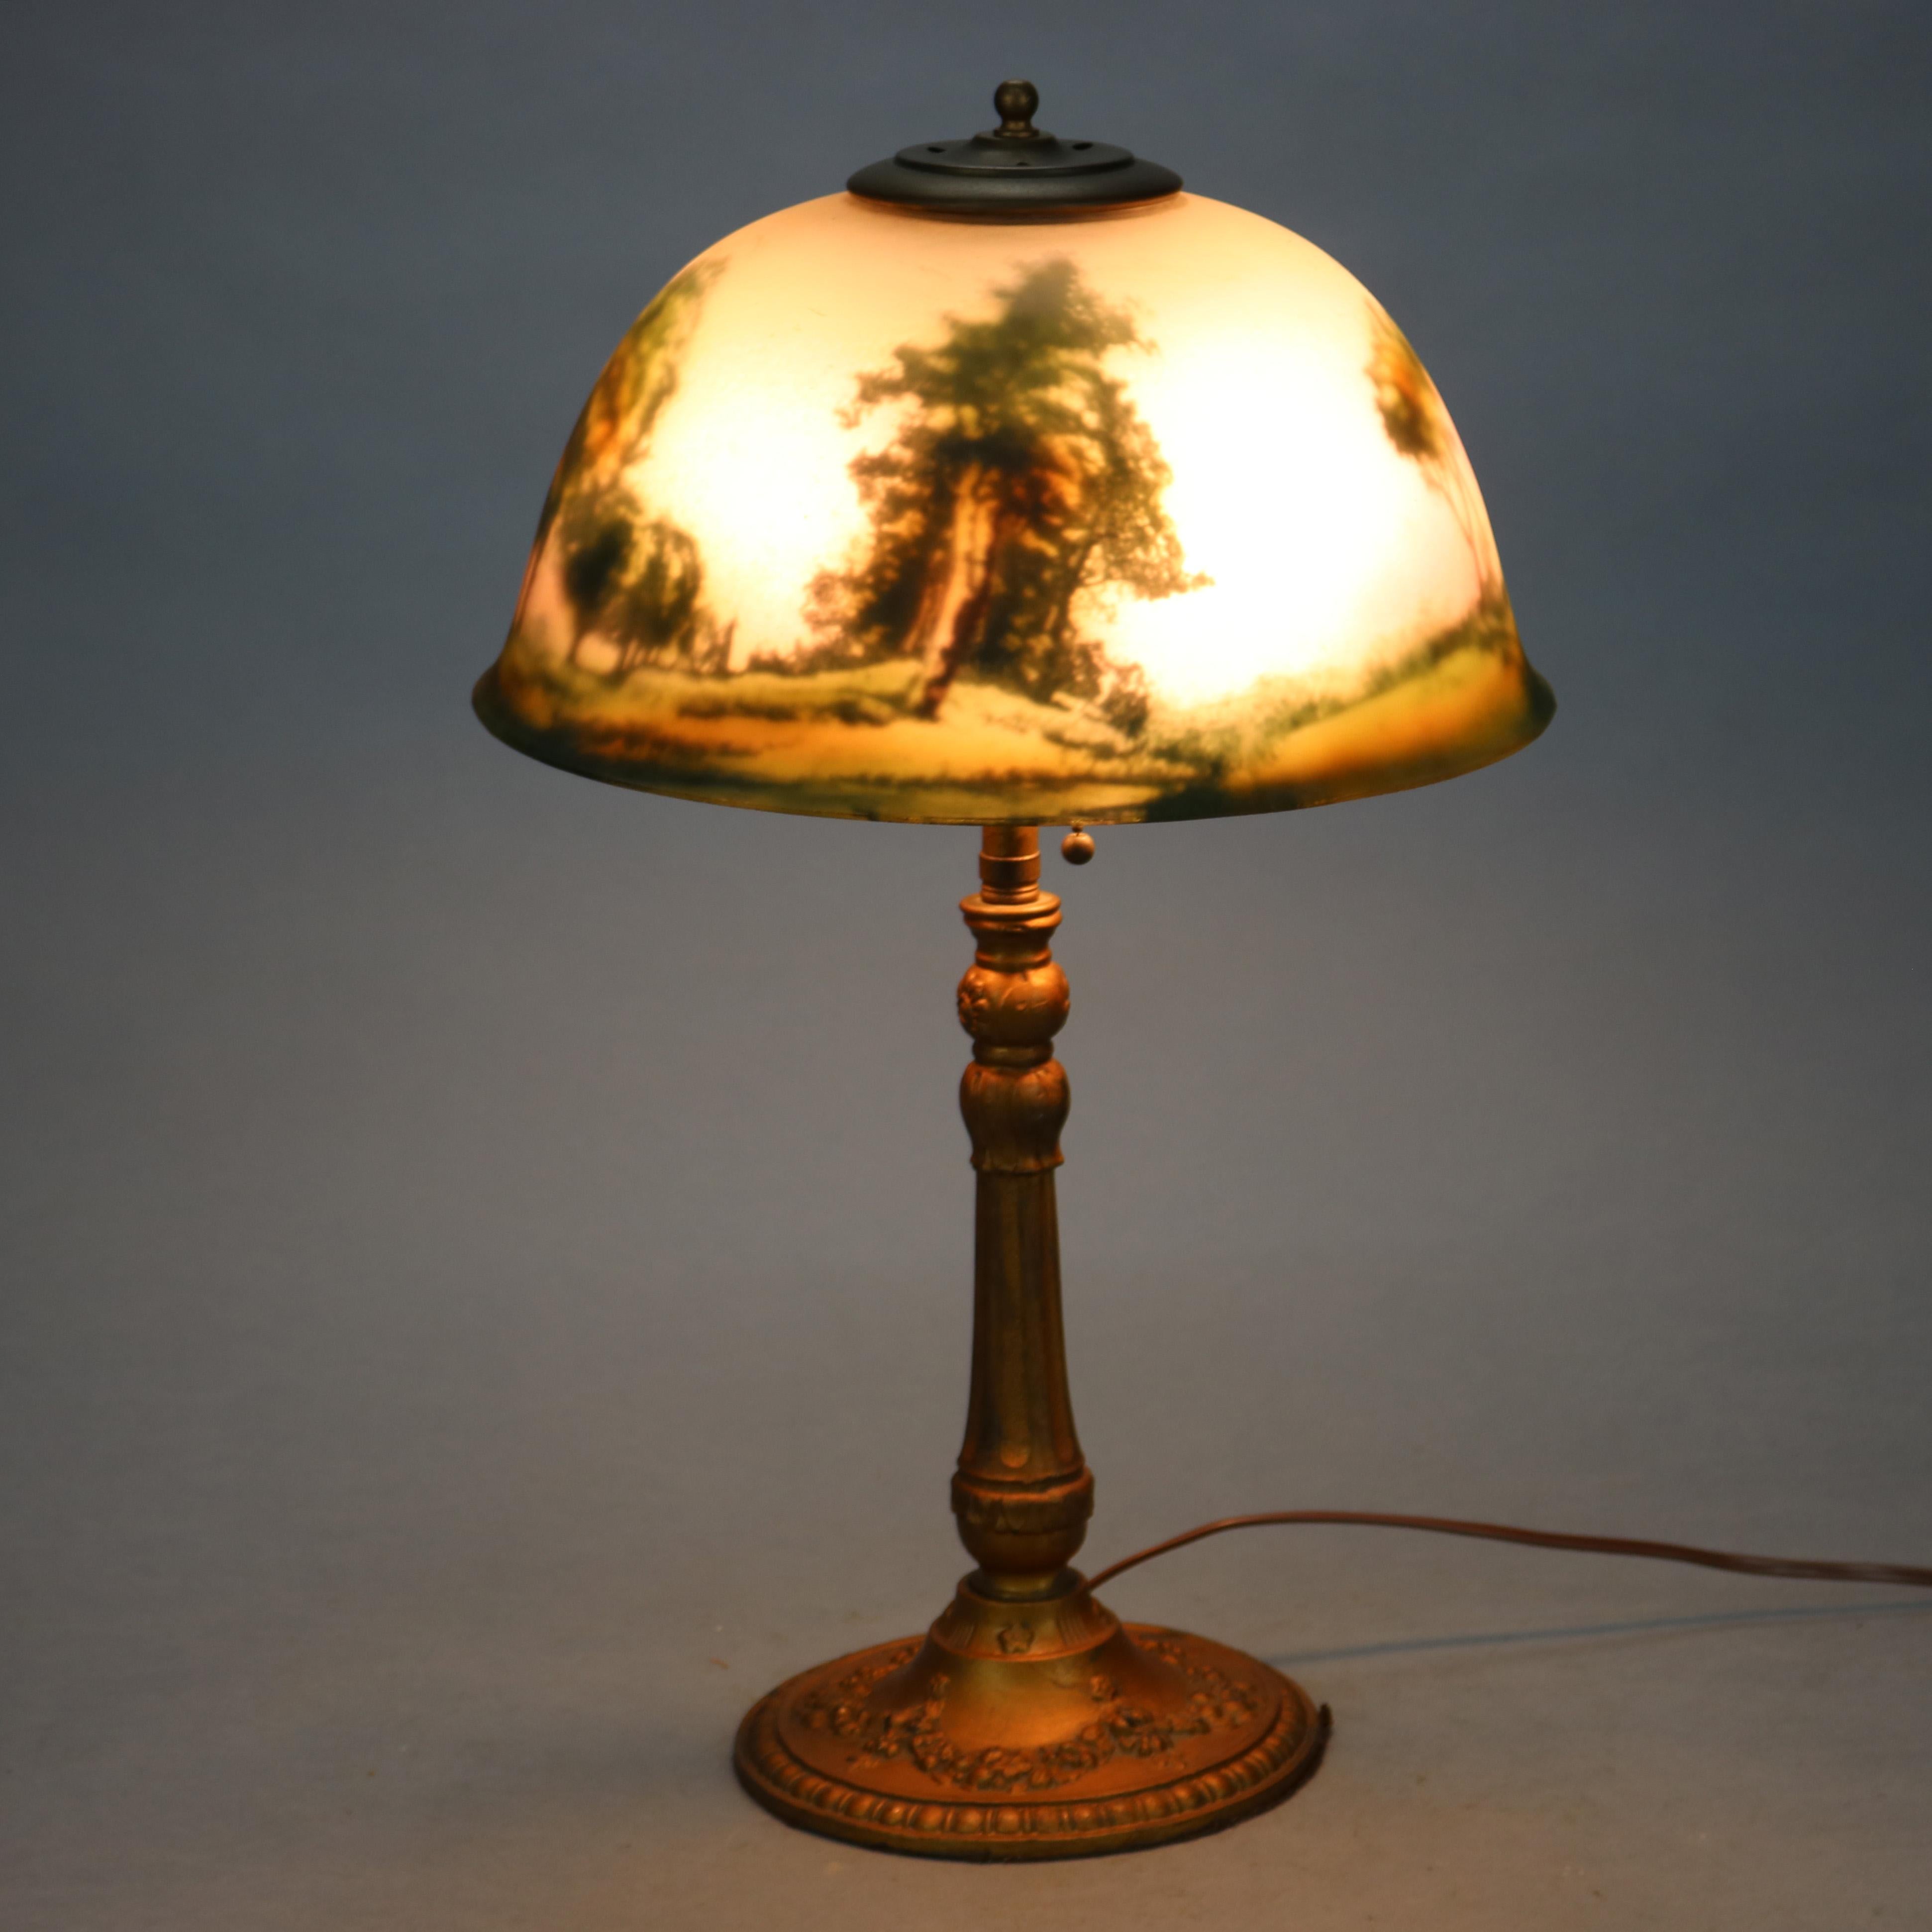 American Antique Arts & Crafts Reverse Painted Scenic Table Lamp, Circa 1920